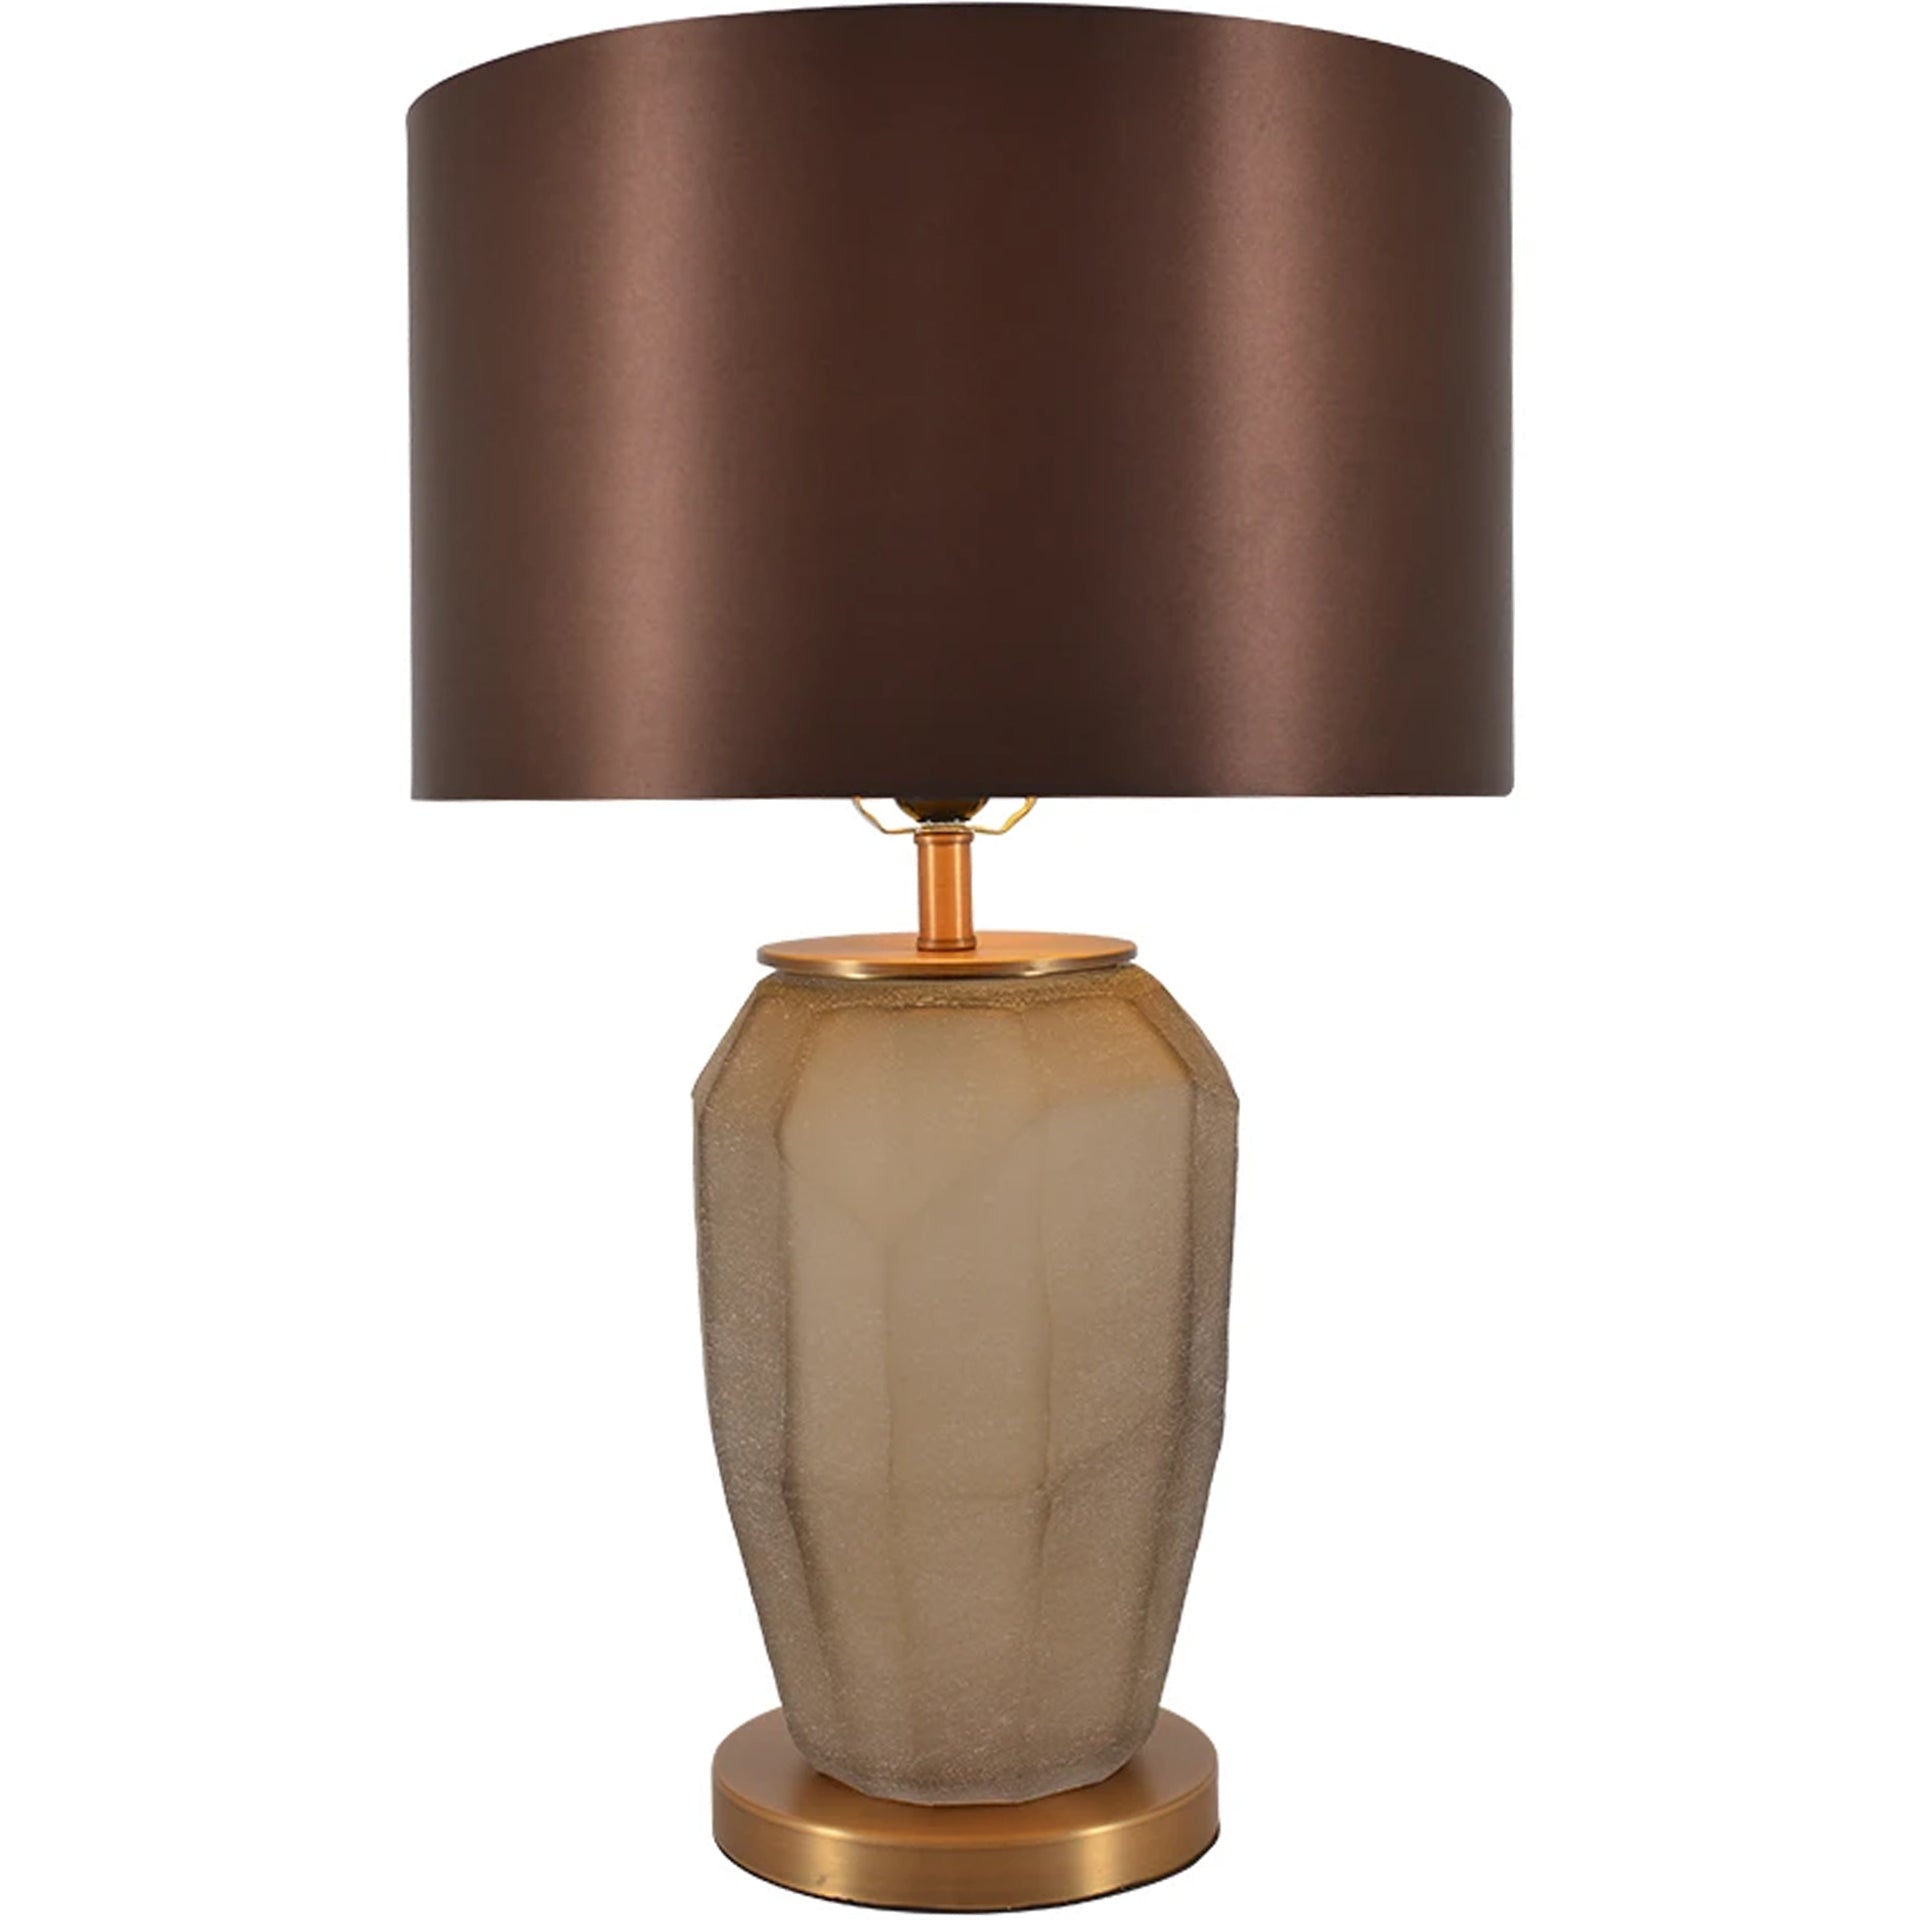 Carro Home Iris Sculpted Glass Table Lamp 23" - Spiced Apricot/Chocolate Brown